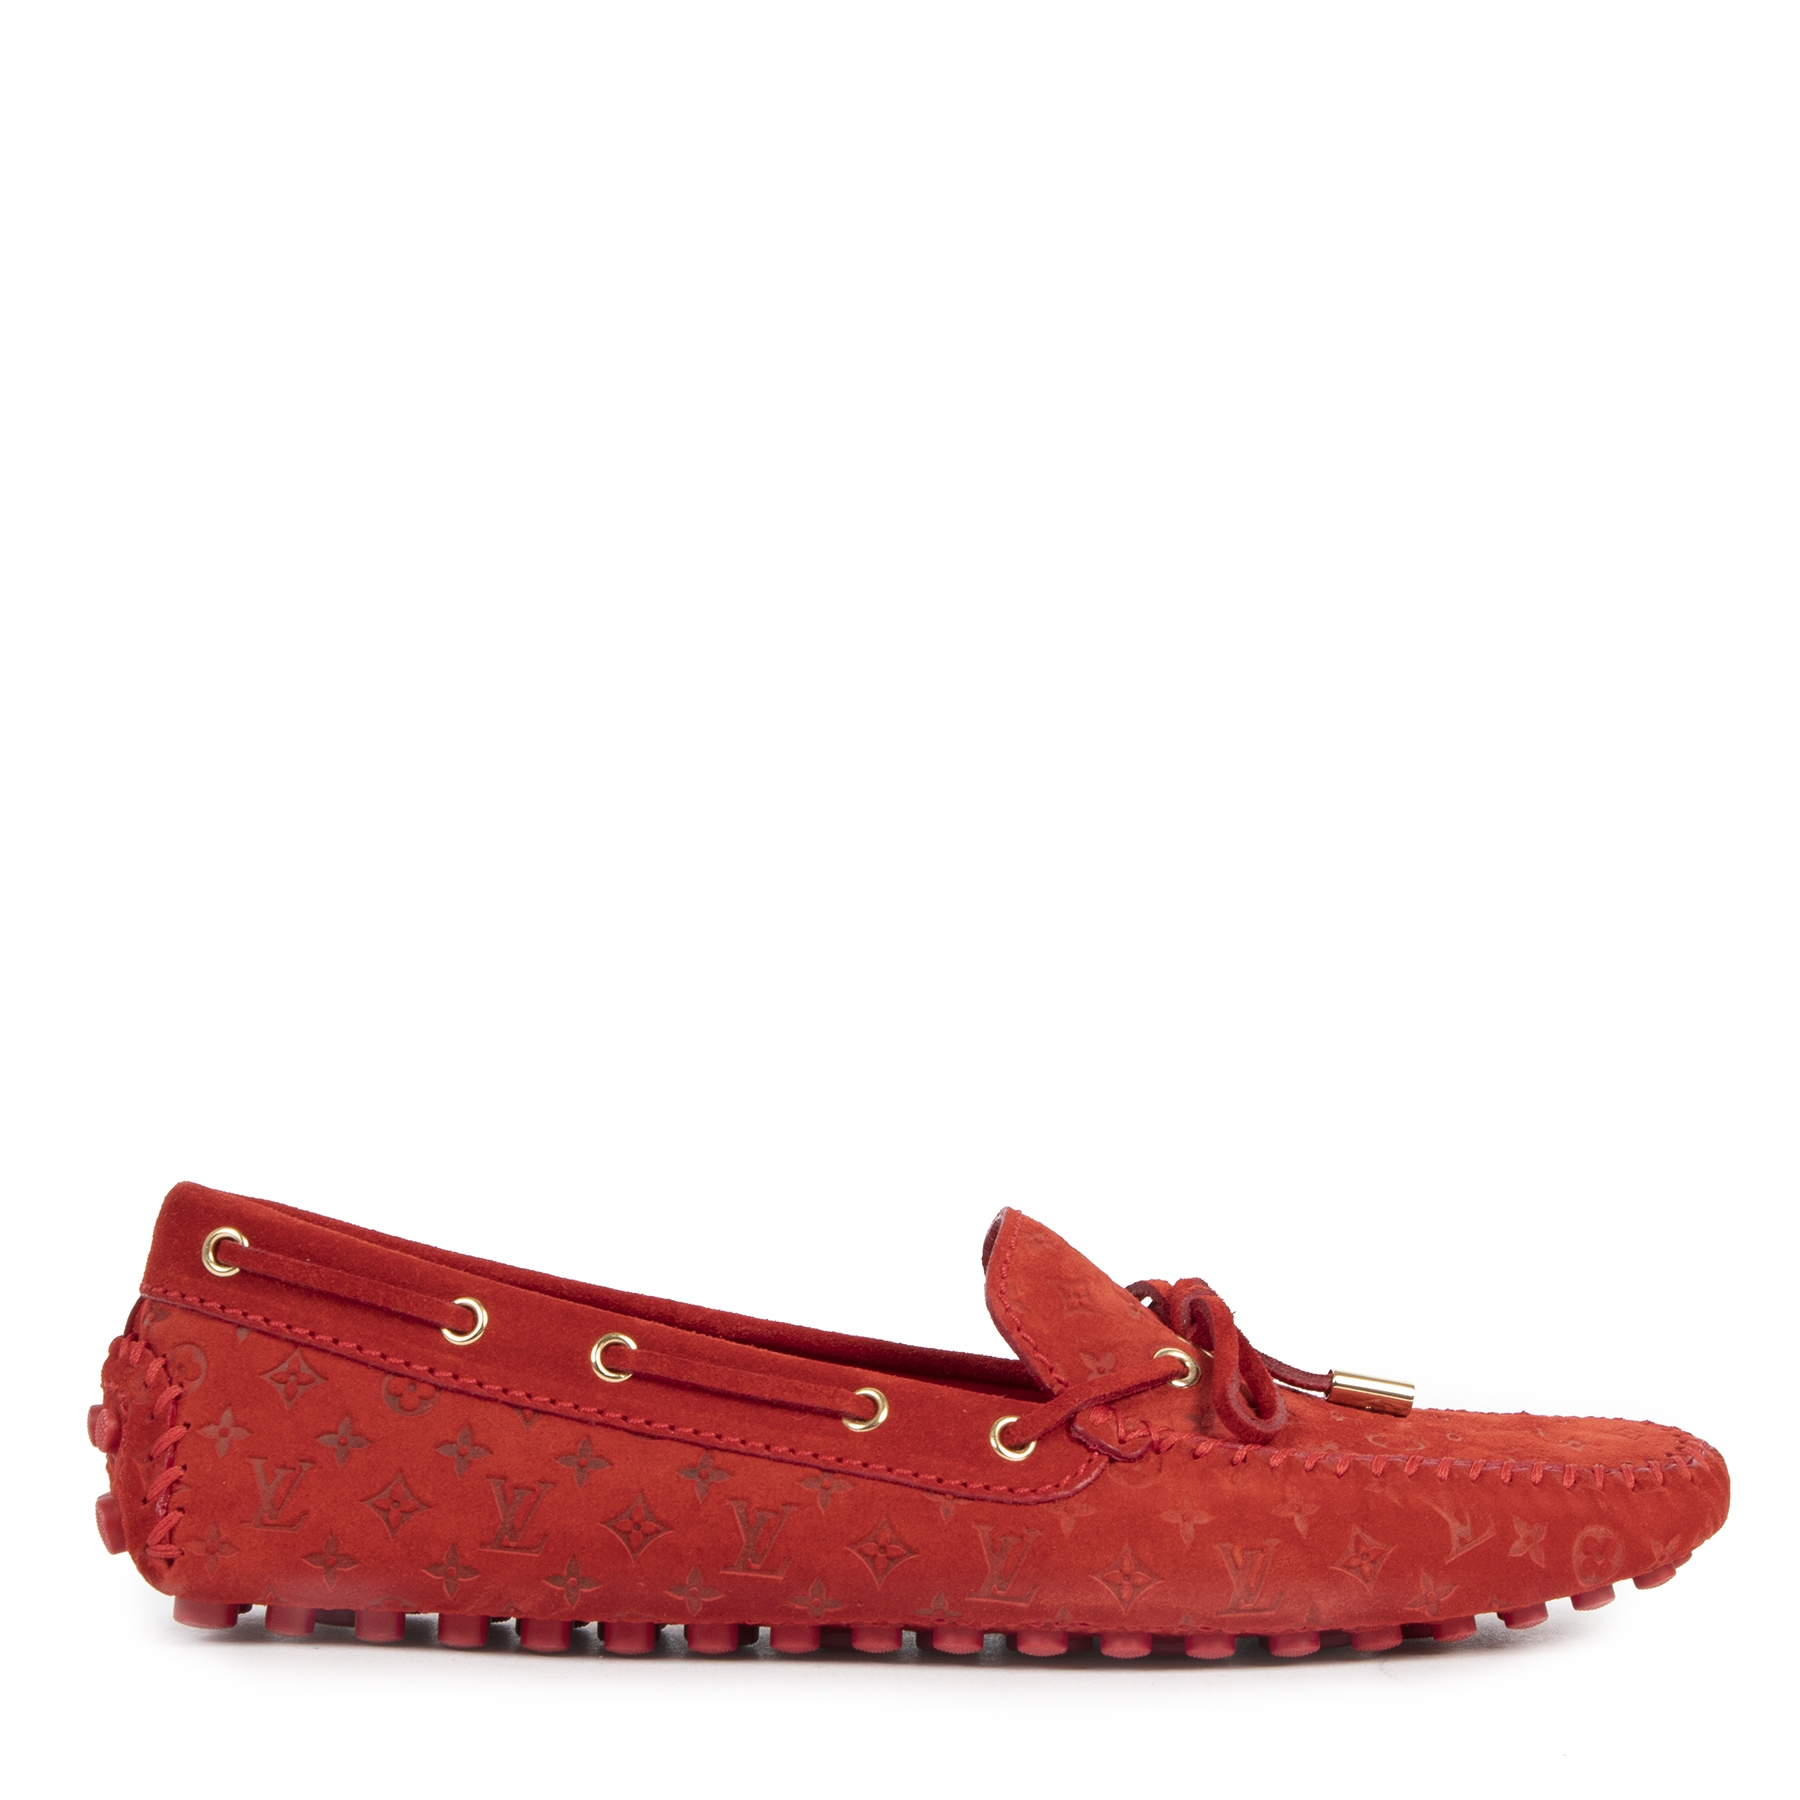 Buy Louis Vuitton LVxNBA LV Loafer at Redfynd